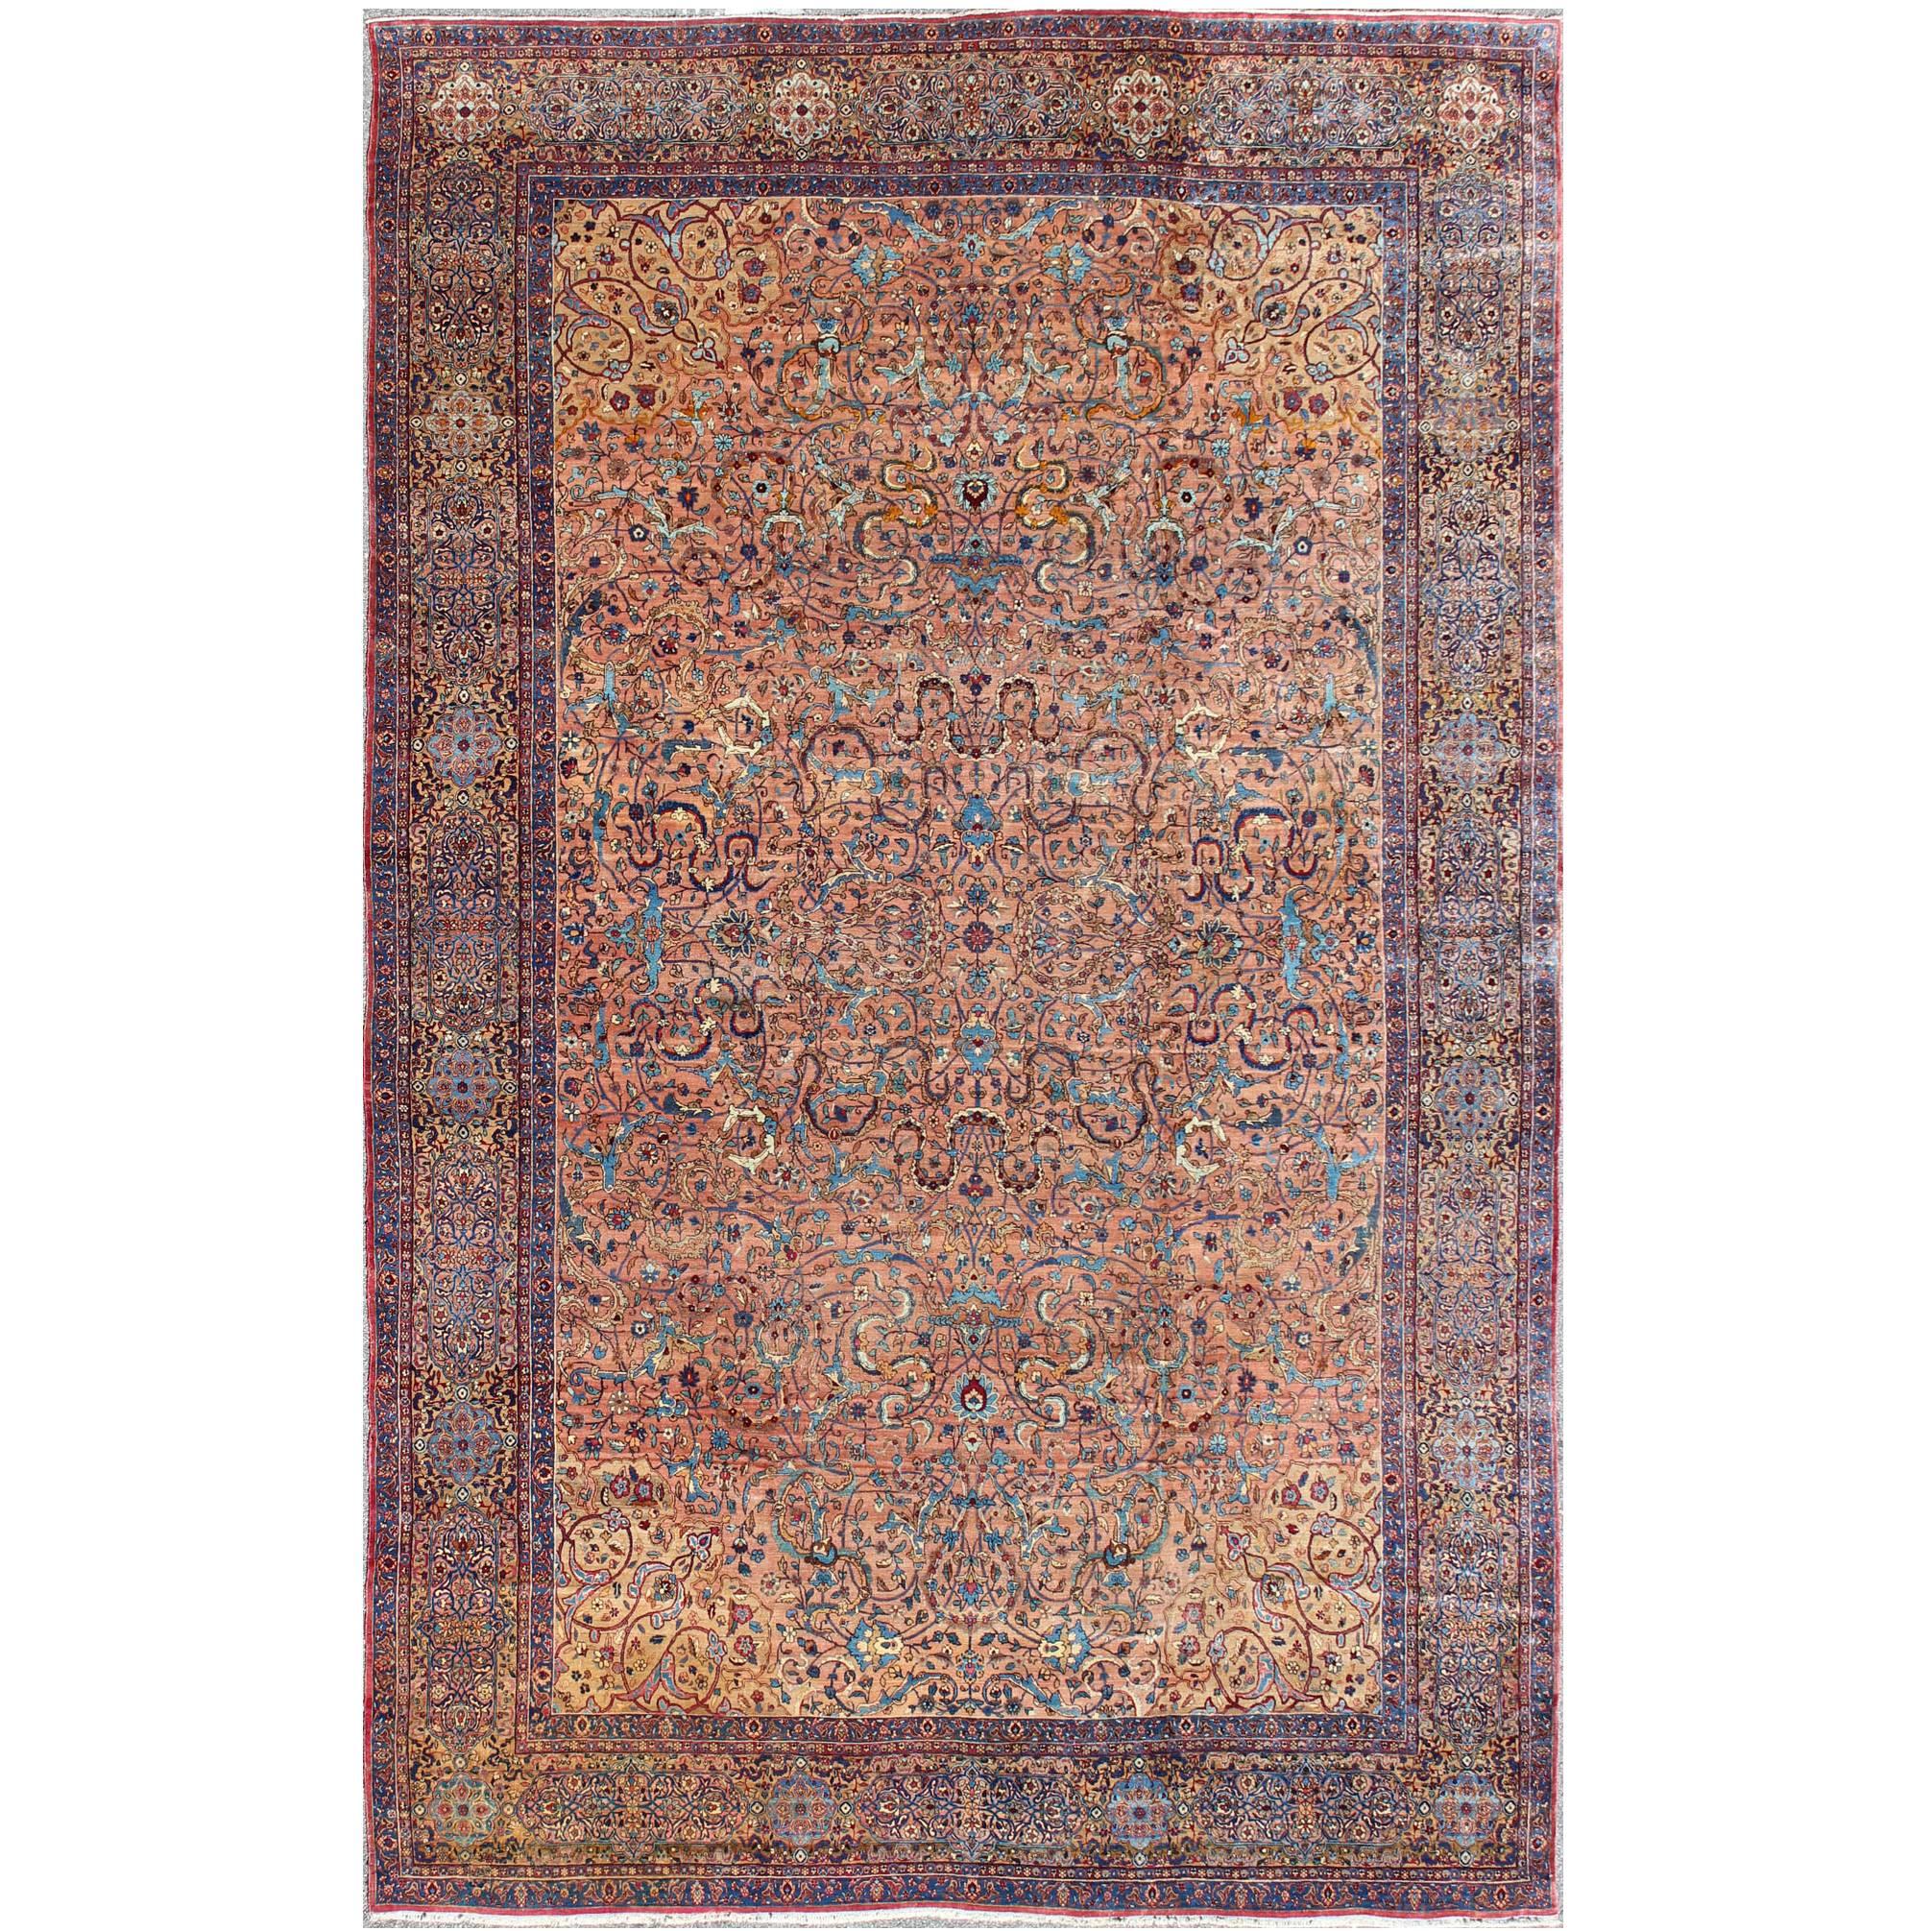  Classic Antique Lavar Kerman Large Persian Rug with amazing intricacy